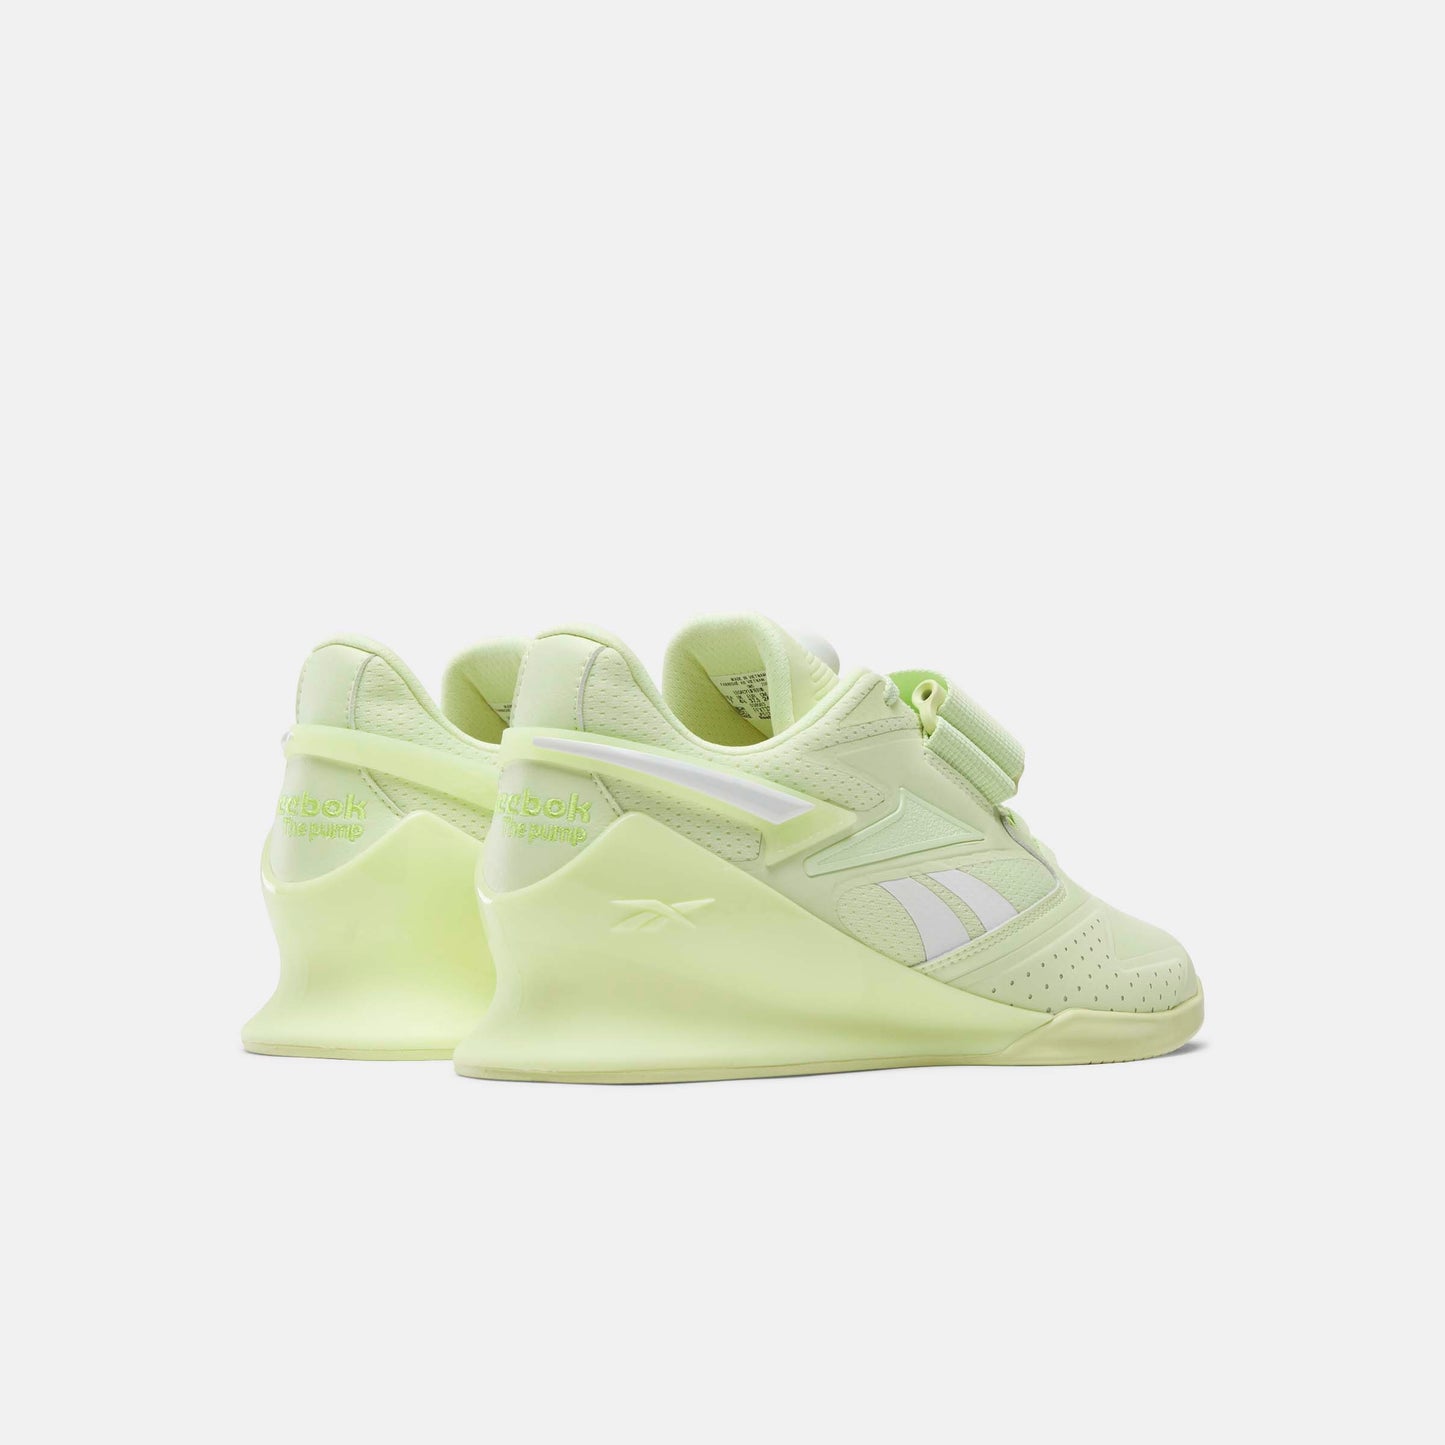 Legacy Lifter III Women's Weightlifting Shoes Citrus Glow/White/Laser Lime